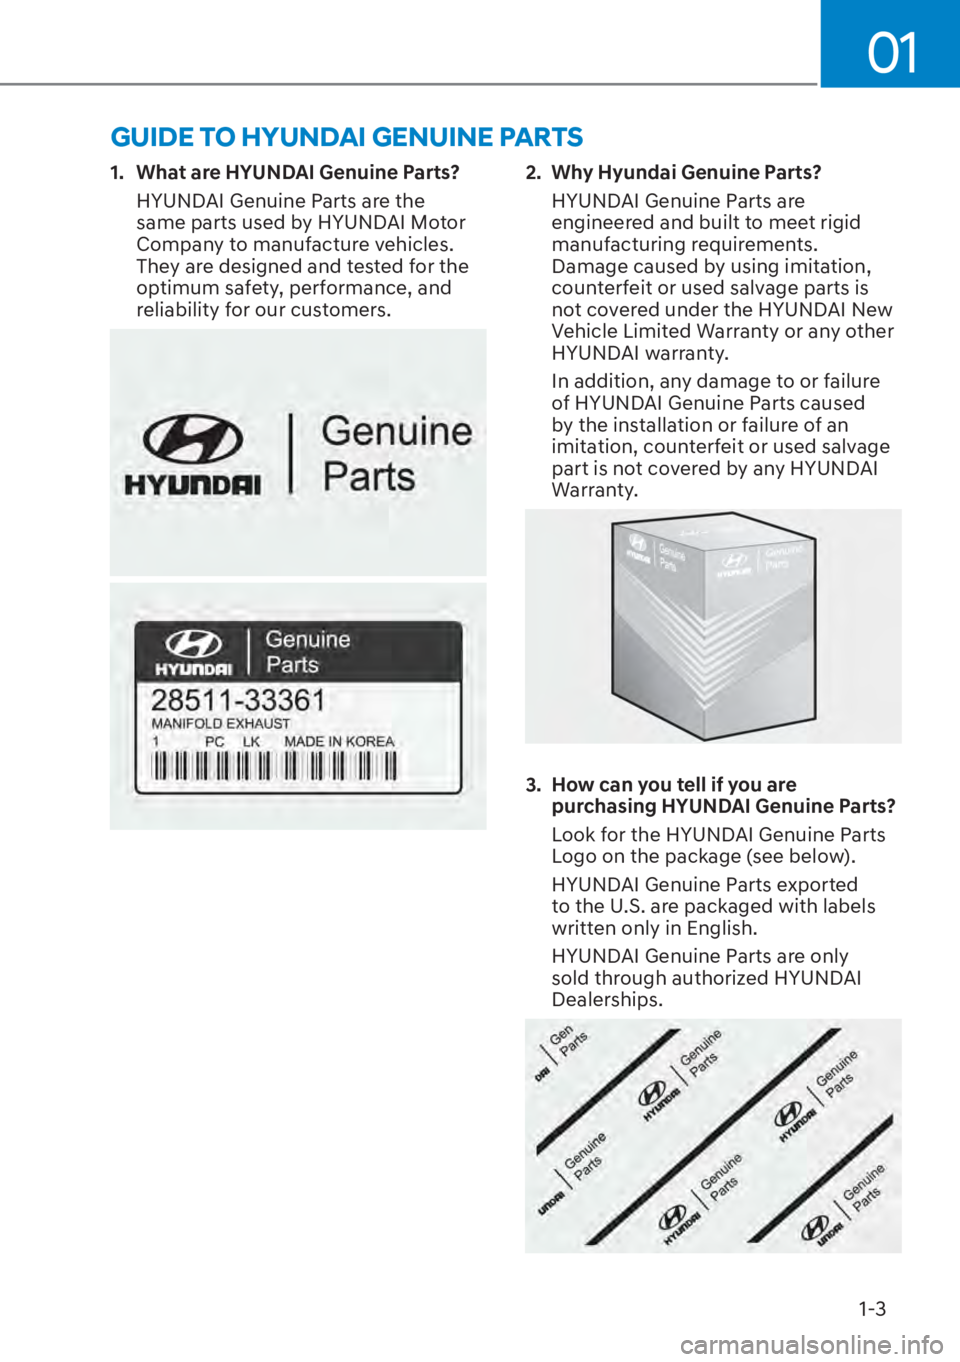 HYUNDAI ELANTRA HYBRID 2023  Owners Manual 01
1-3
1.  What are HYUNDAI Genuine Parts?HYUNDAI Genuine Parts are the 
same parts used by HYUNDAI Motor 
Company to manufacture vehicles. 
They are designed and tested for the 
optimum safety, perfo